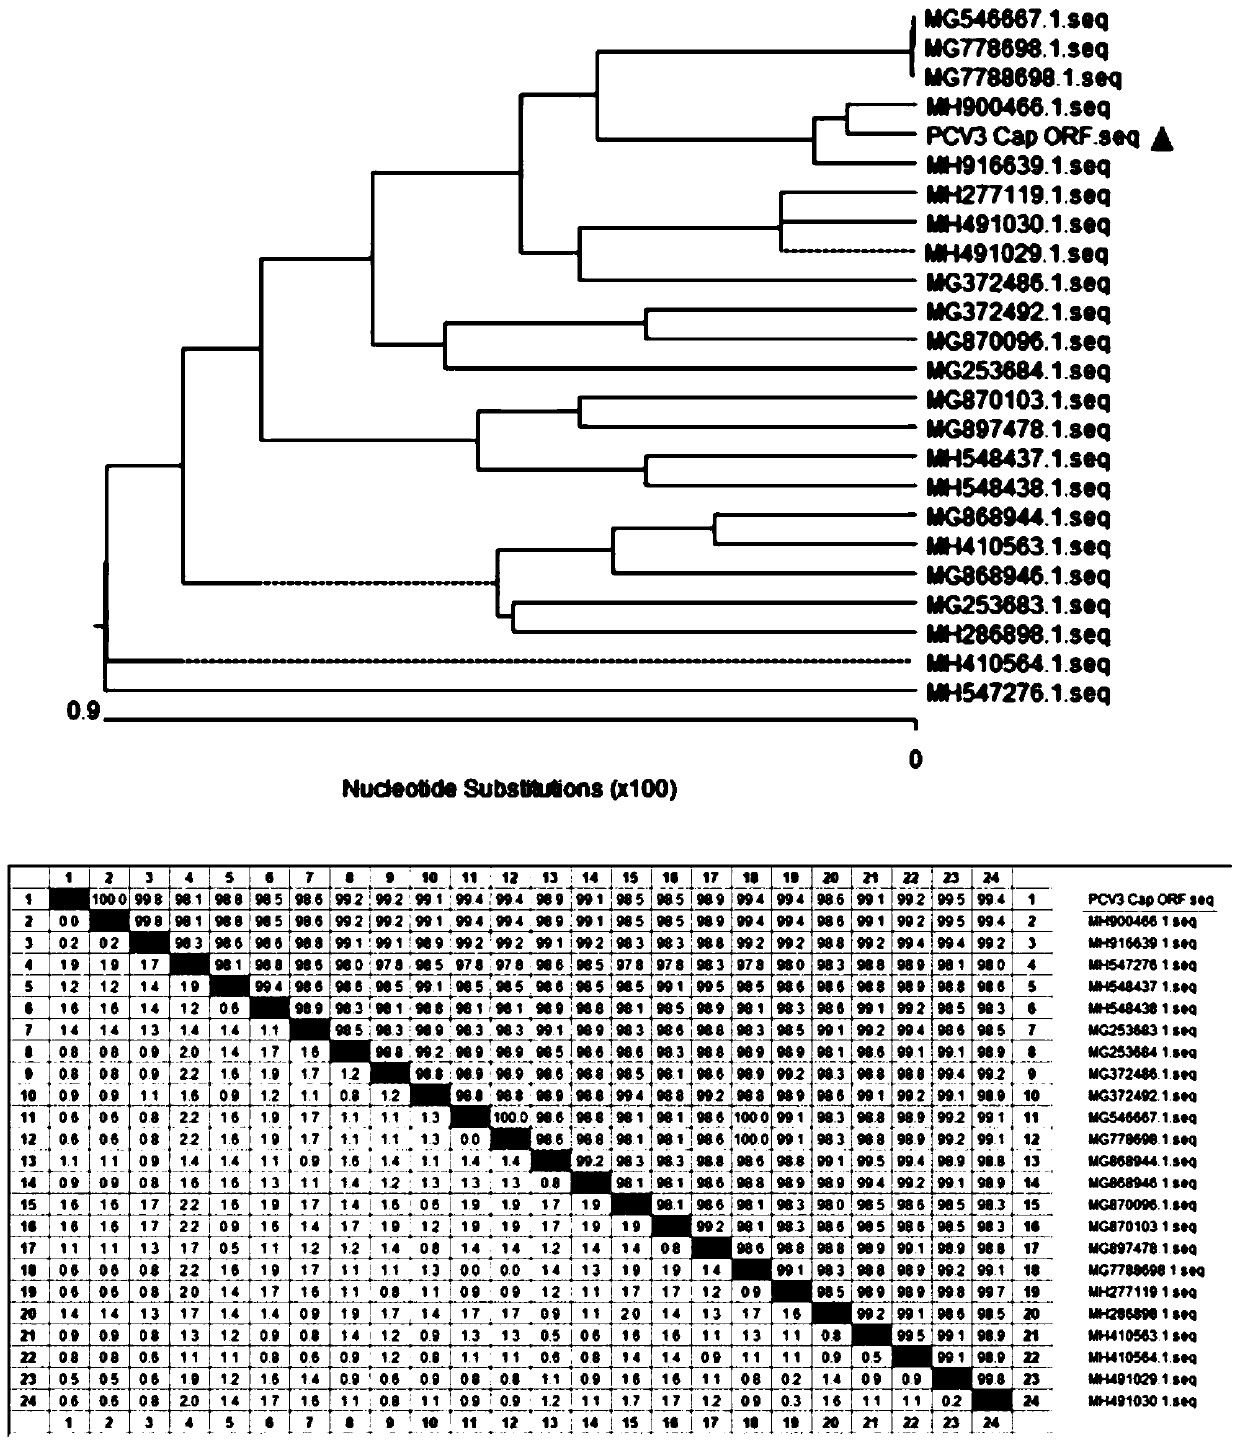 Recombinant rhabditiform plasmid and application thereof to expression of PCV3 Cap protein and vaccine